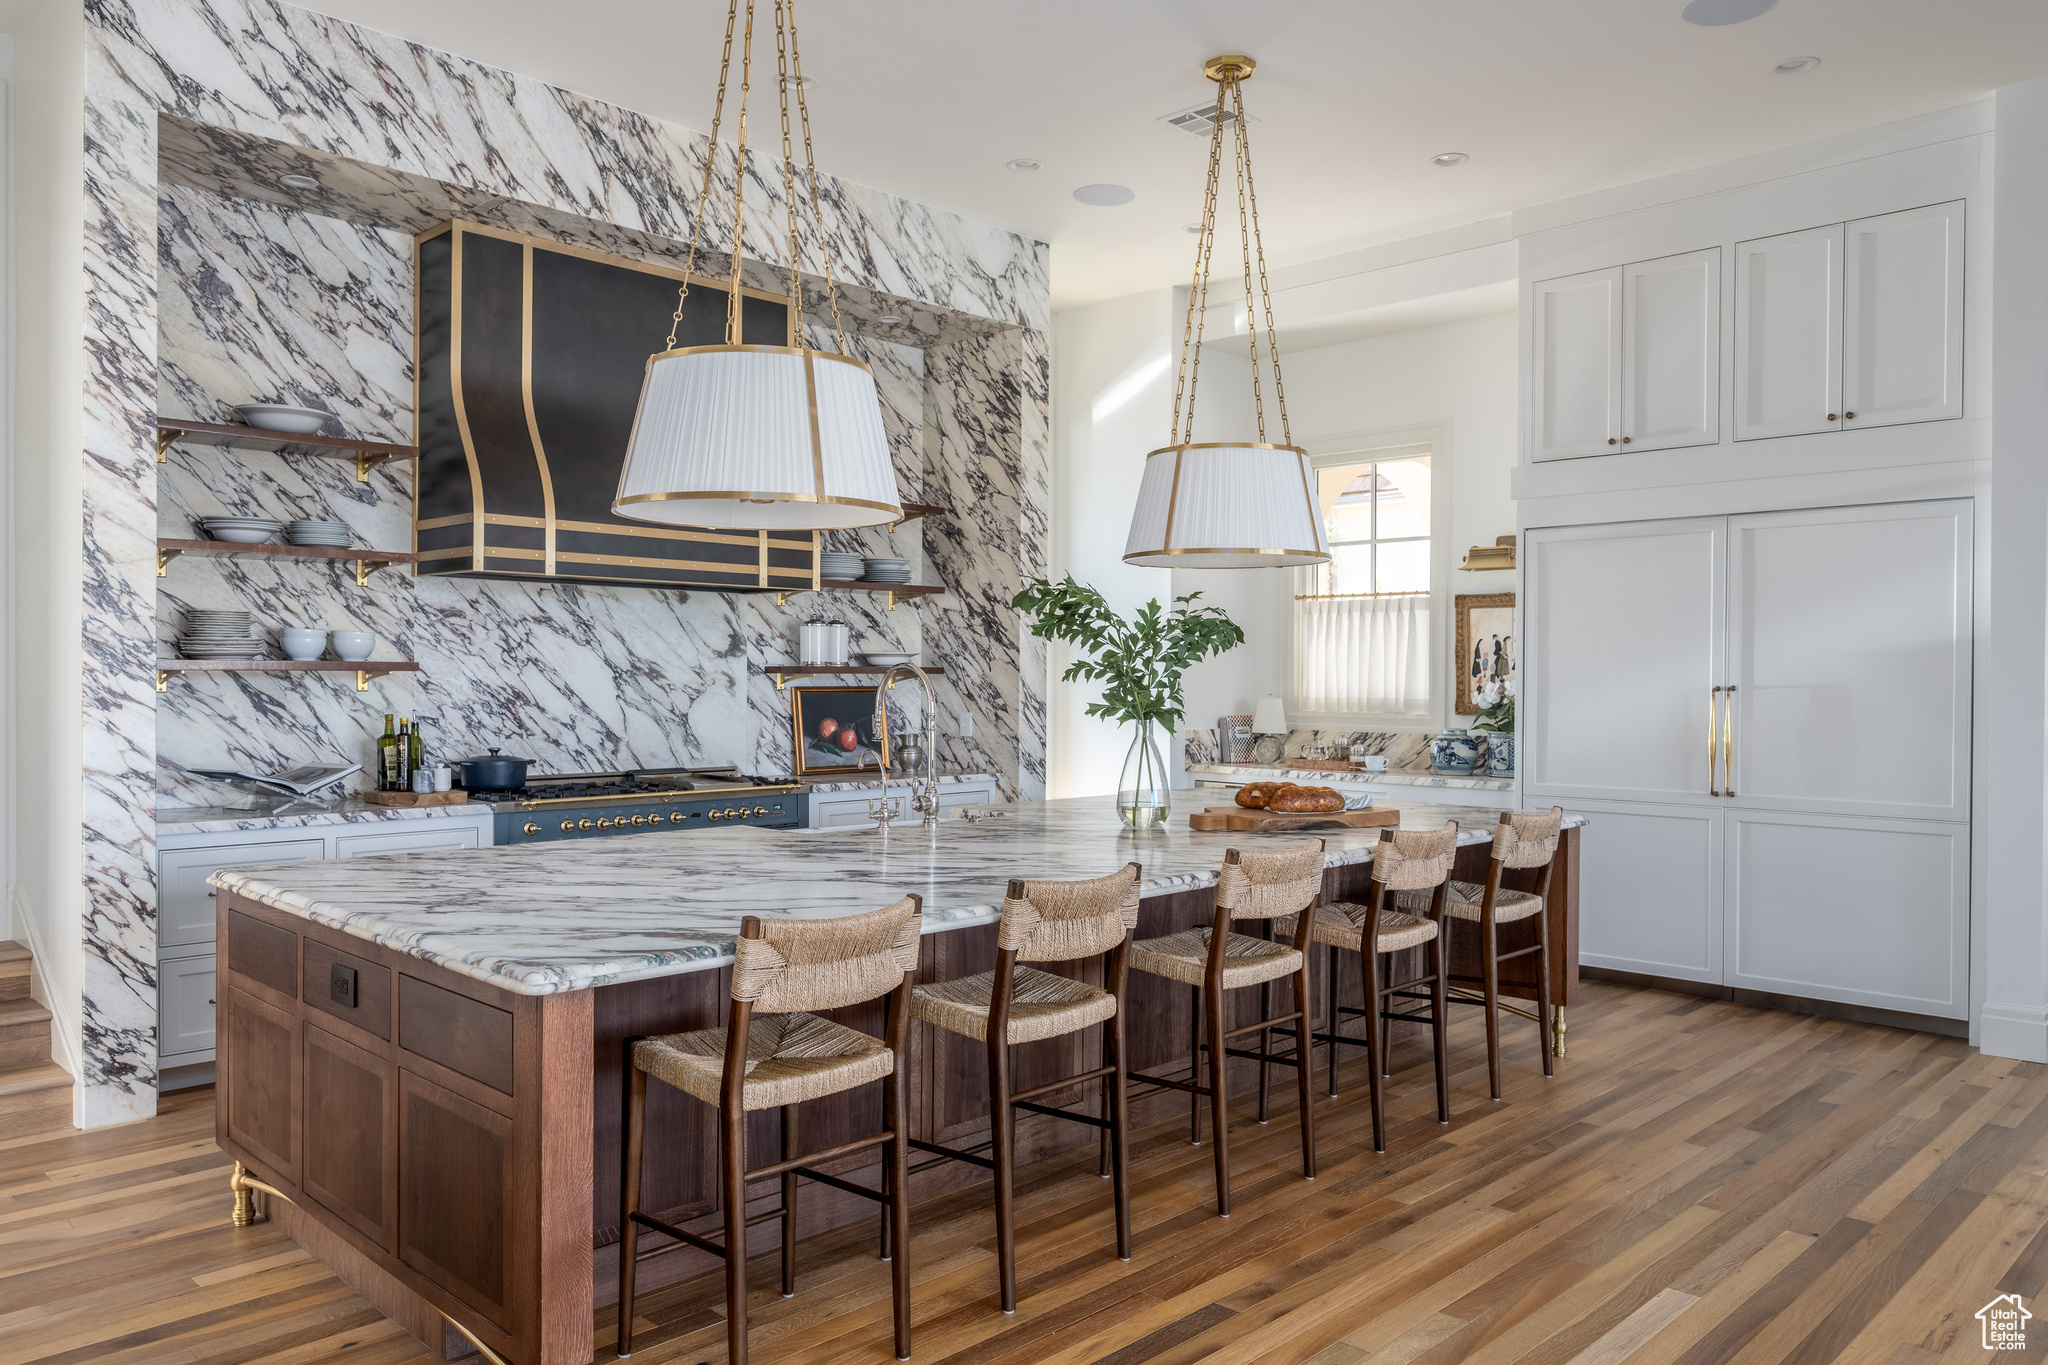 Kitchen with a kitchen breakfast bar, light stone countertops, hanging light fixtures, a center island with sink, and hardwood / wood-style flooring